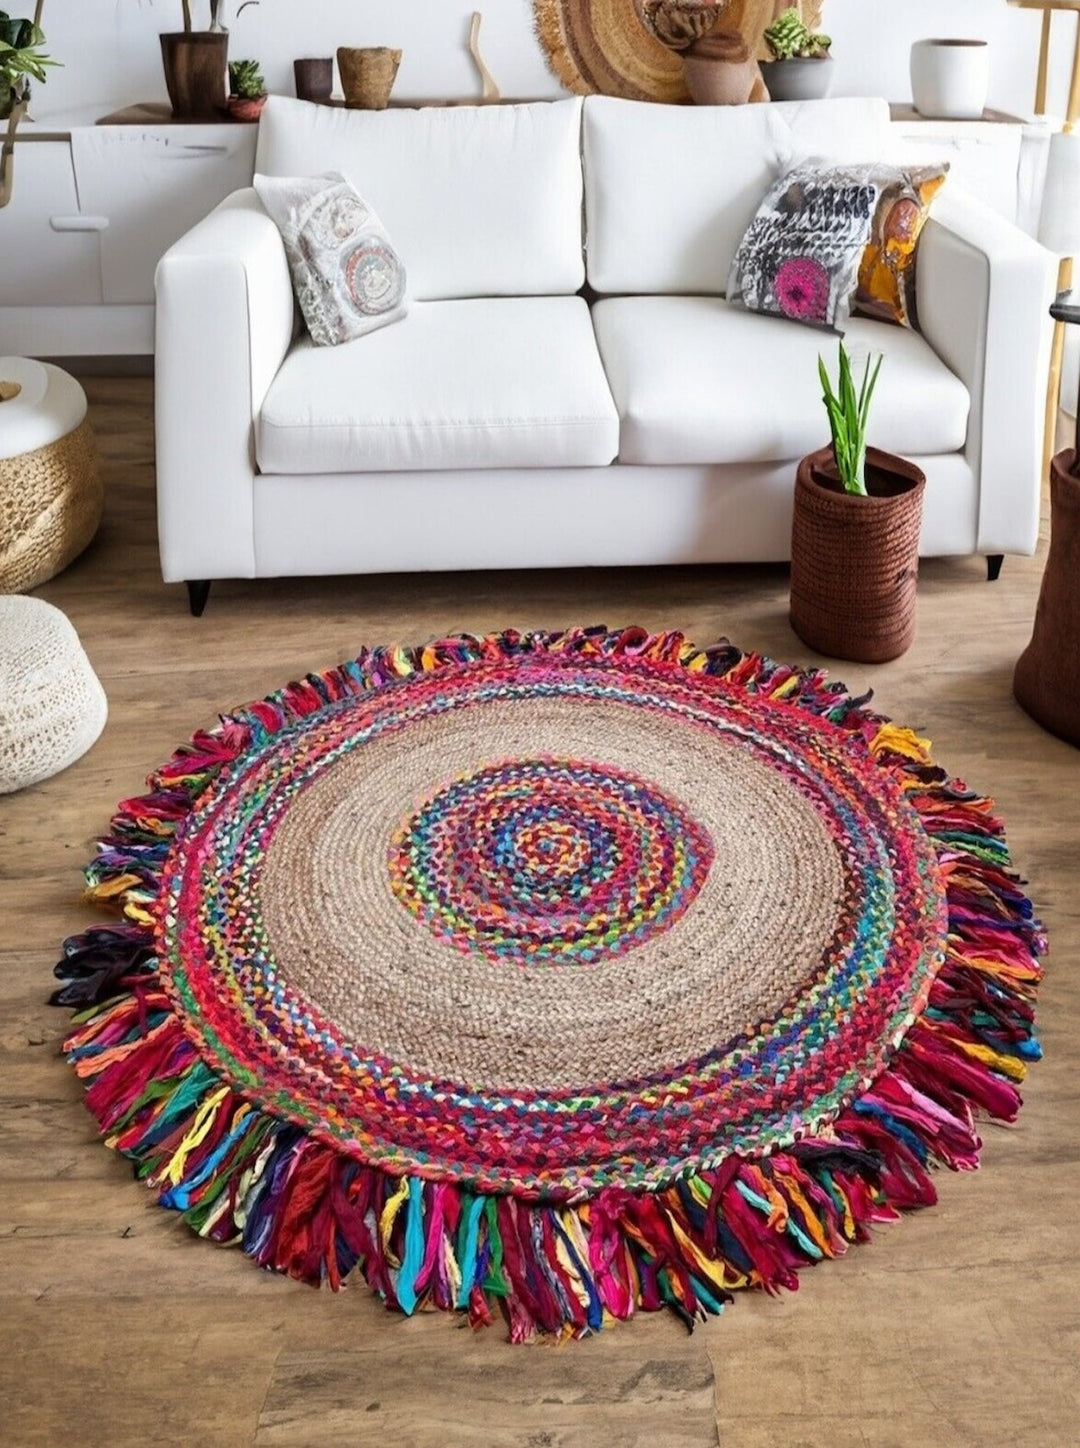 JHAALAR Round Indian Rug Jute with Thick Multi Coloured Tassels